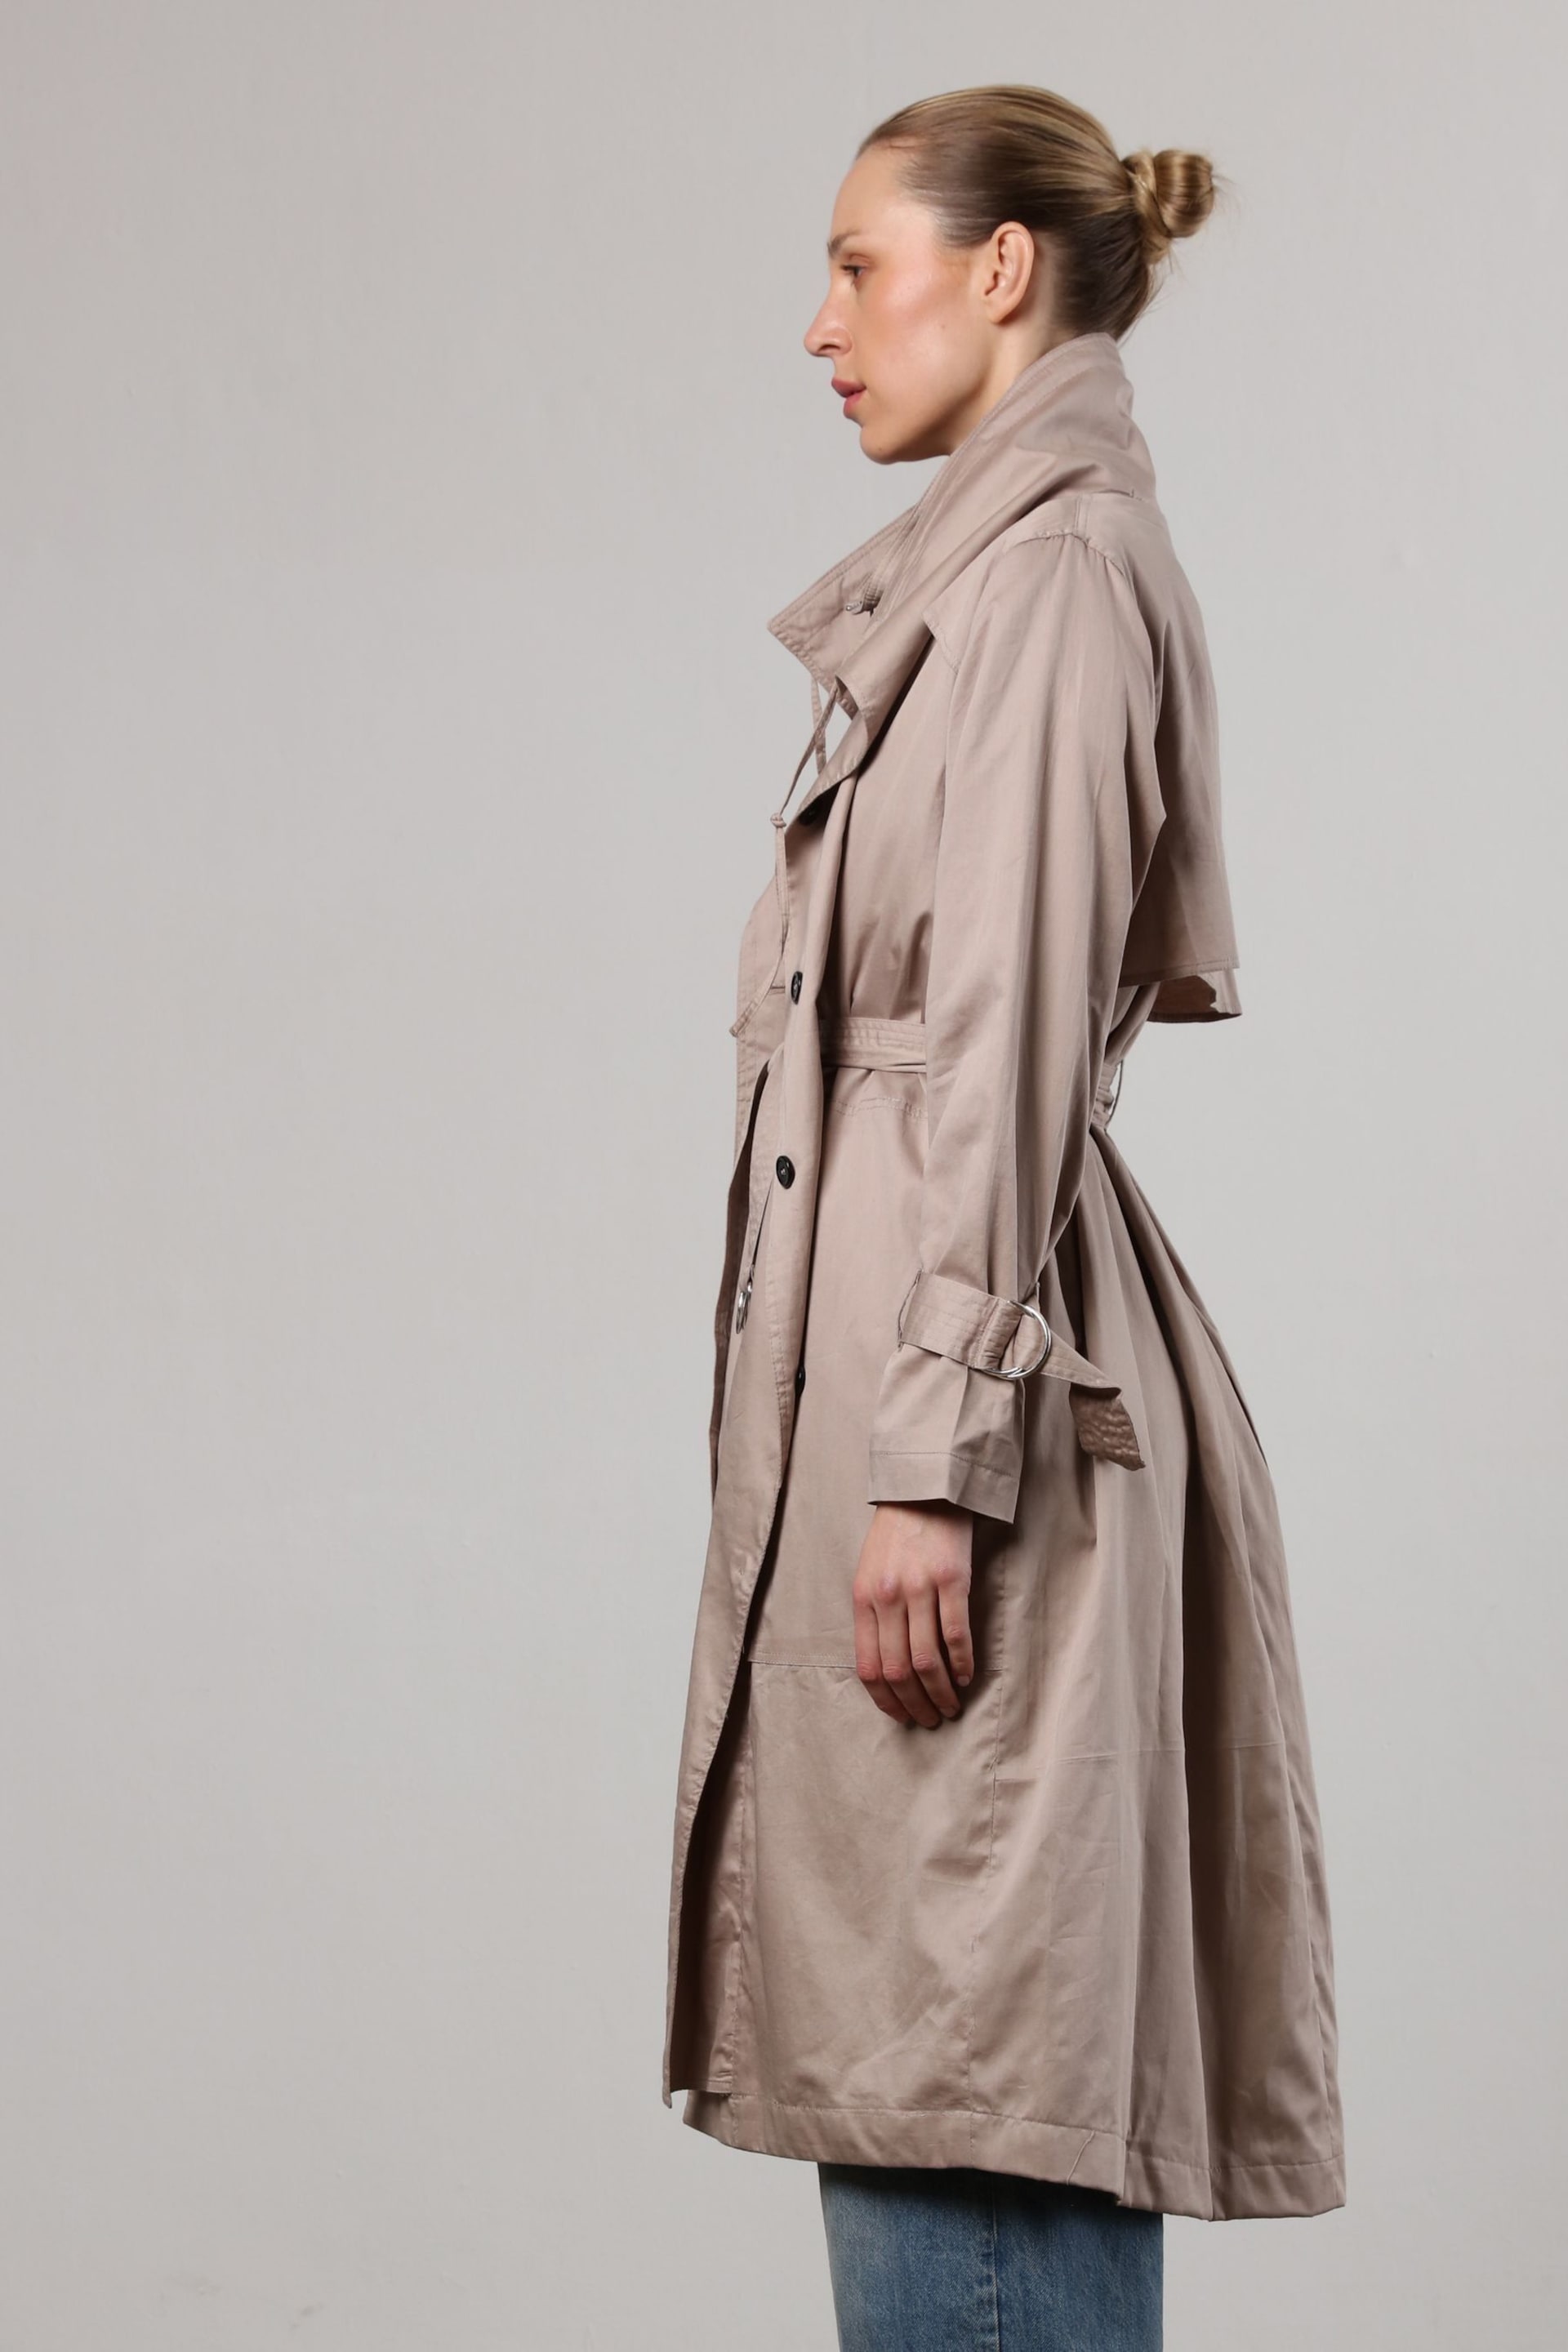 Religion Natural Lightweight Waterfall Cotton Charisma Trench Coat - Image 2 of 7